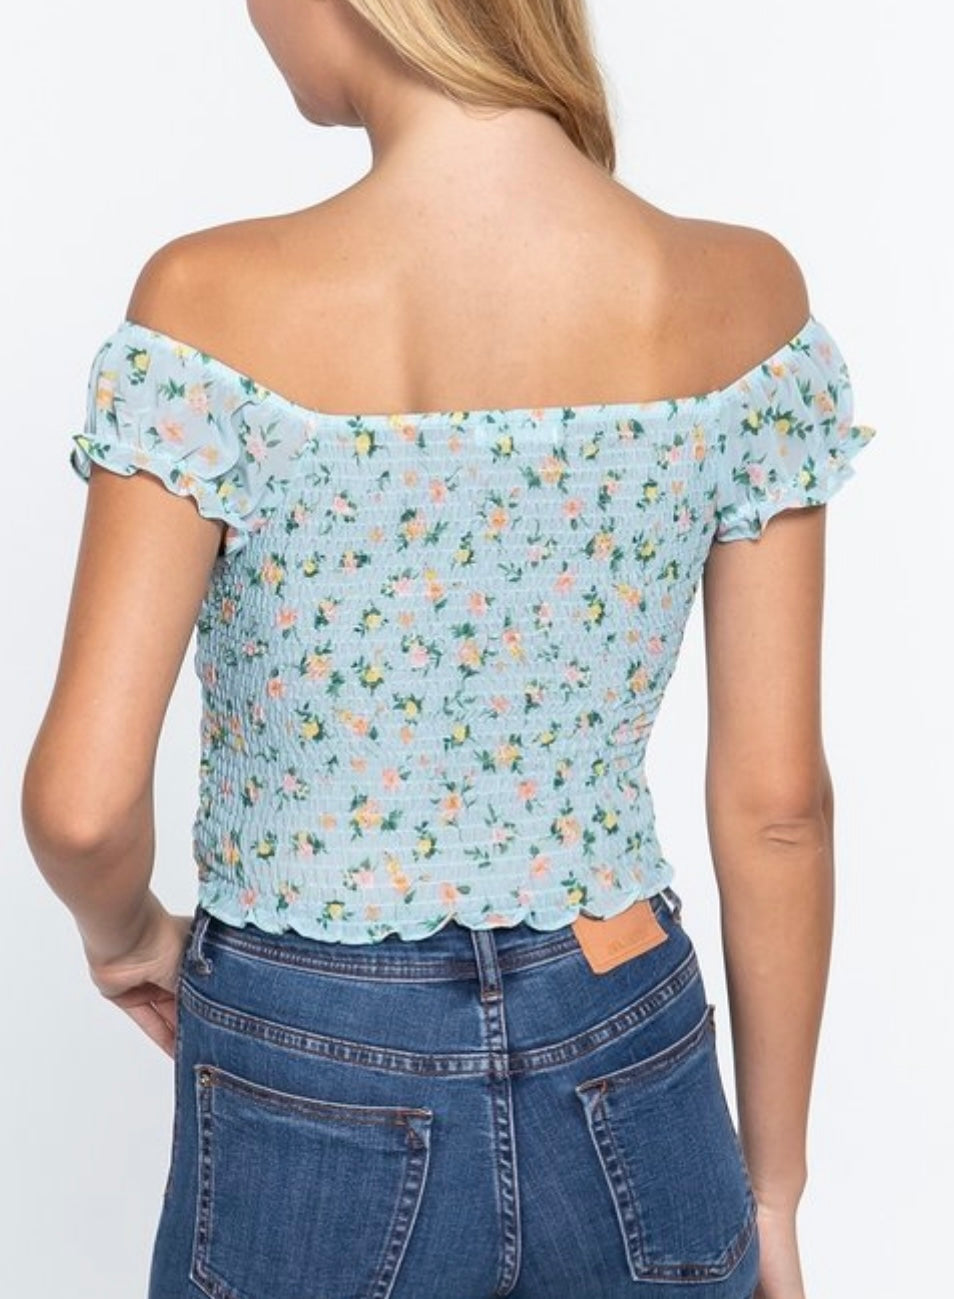 The “Jessica” Blue Floral Corset Style Top